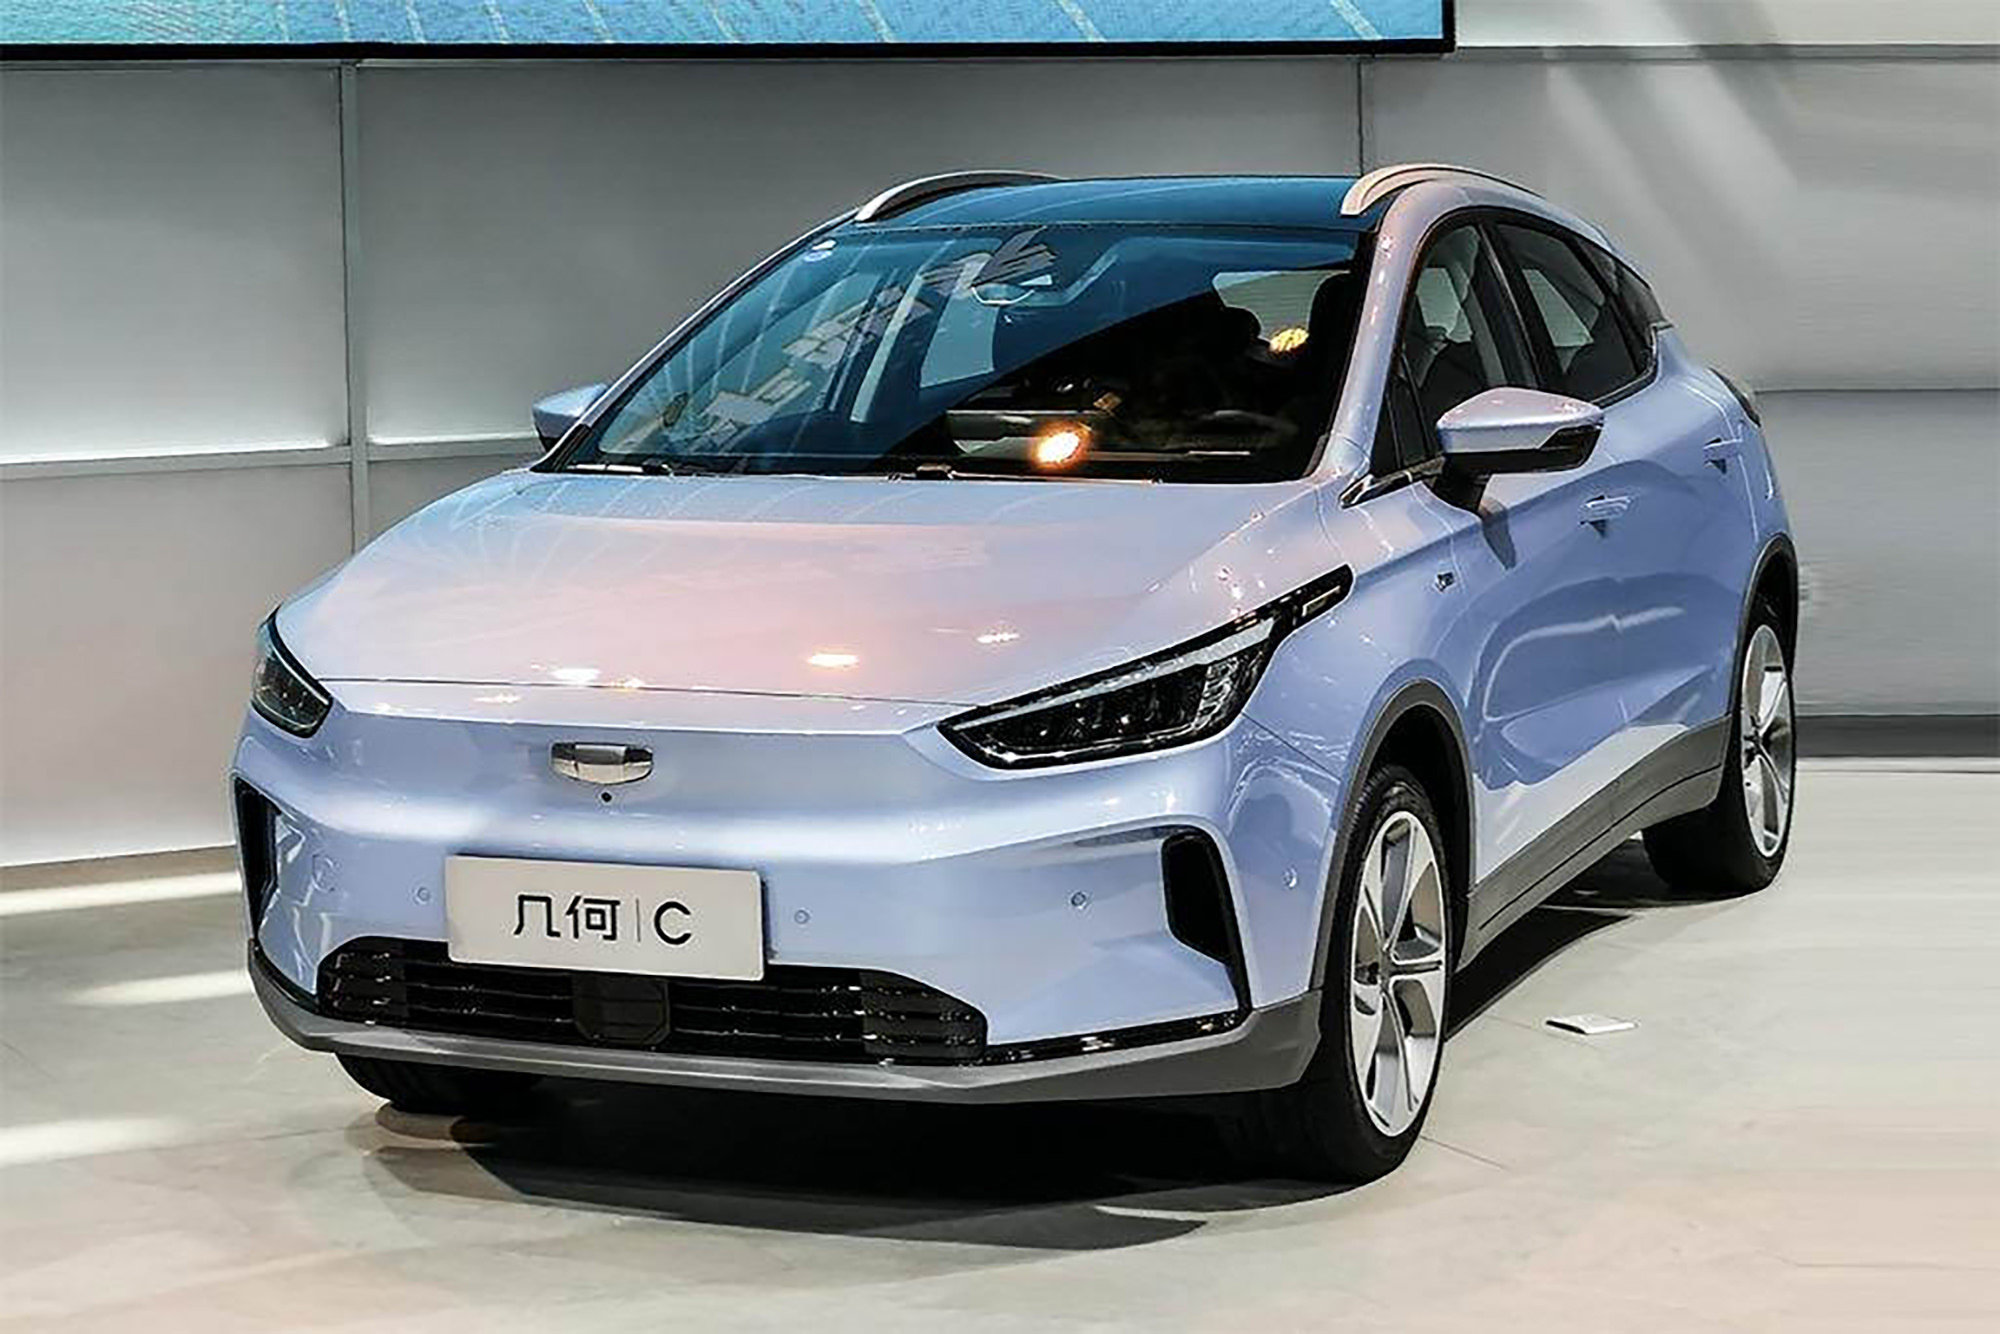 a photo showing a blue electric vehicle from china